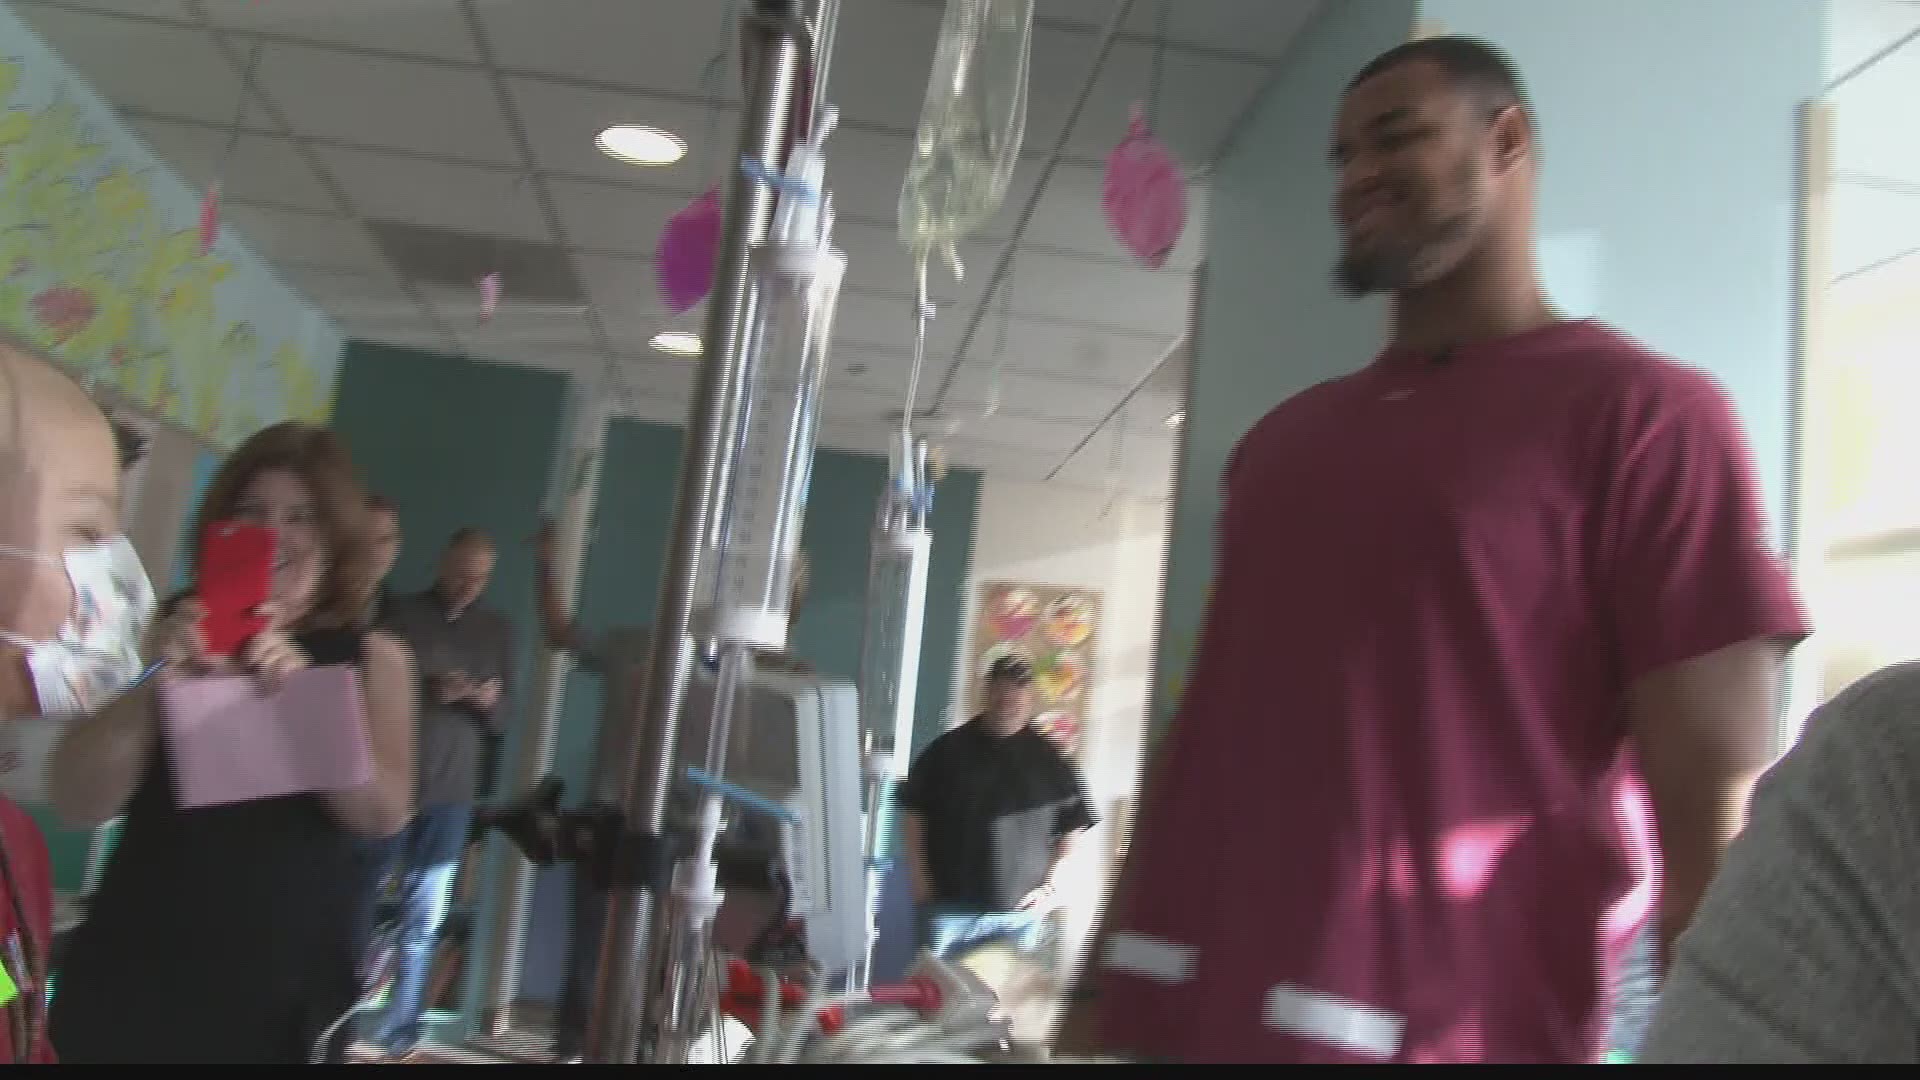 The 49ers defensive End and Sacramento native is spreading cheer to the kids who call the hospital their home for the holidays.